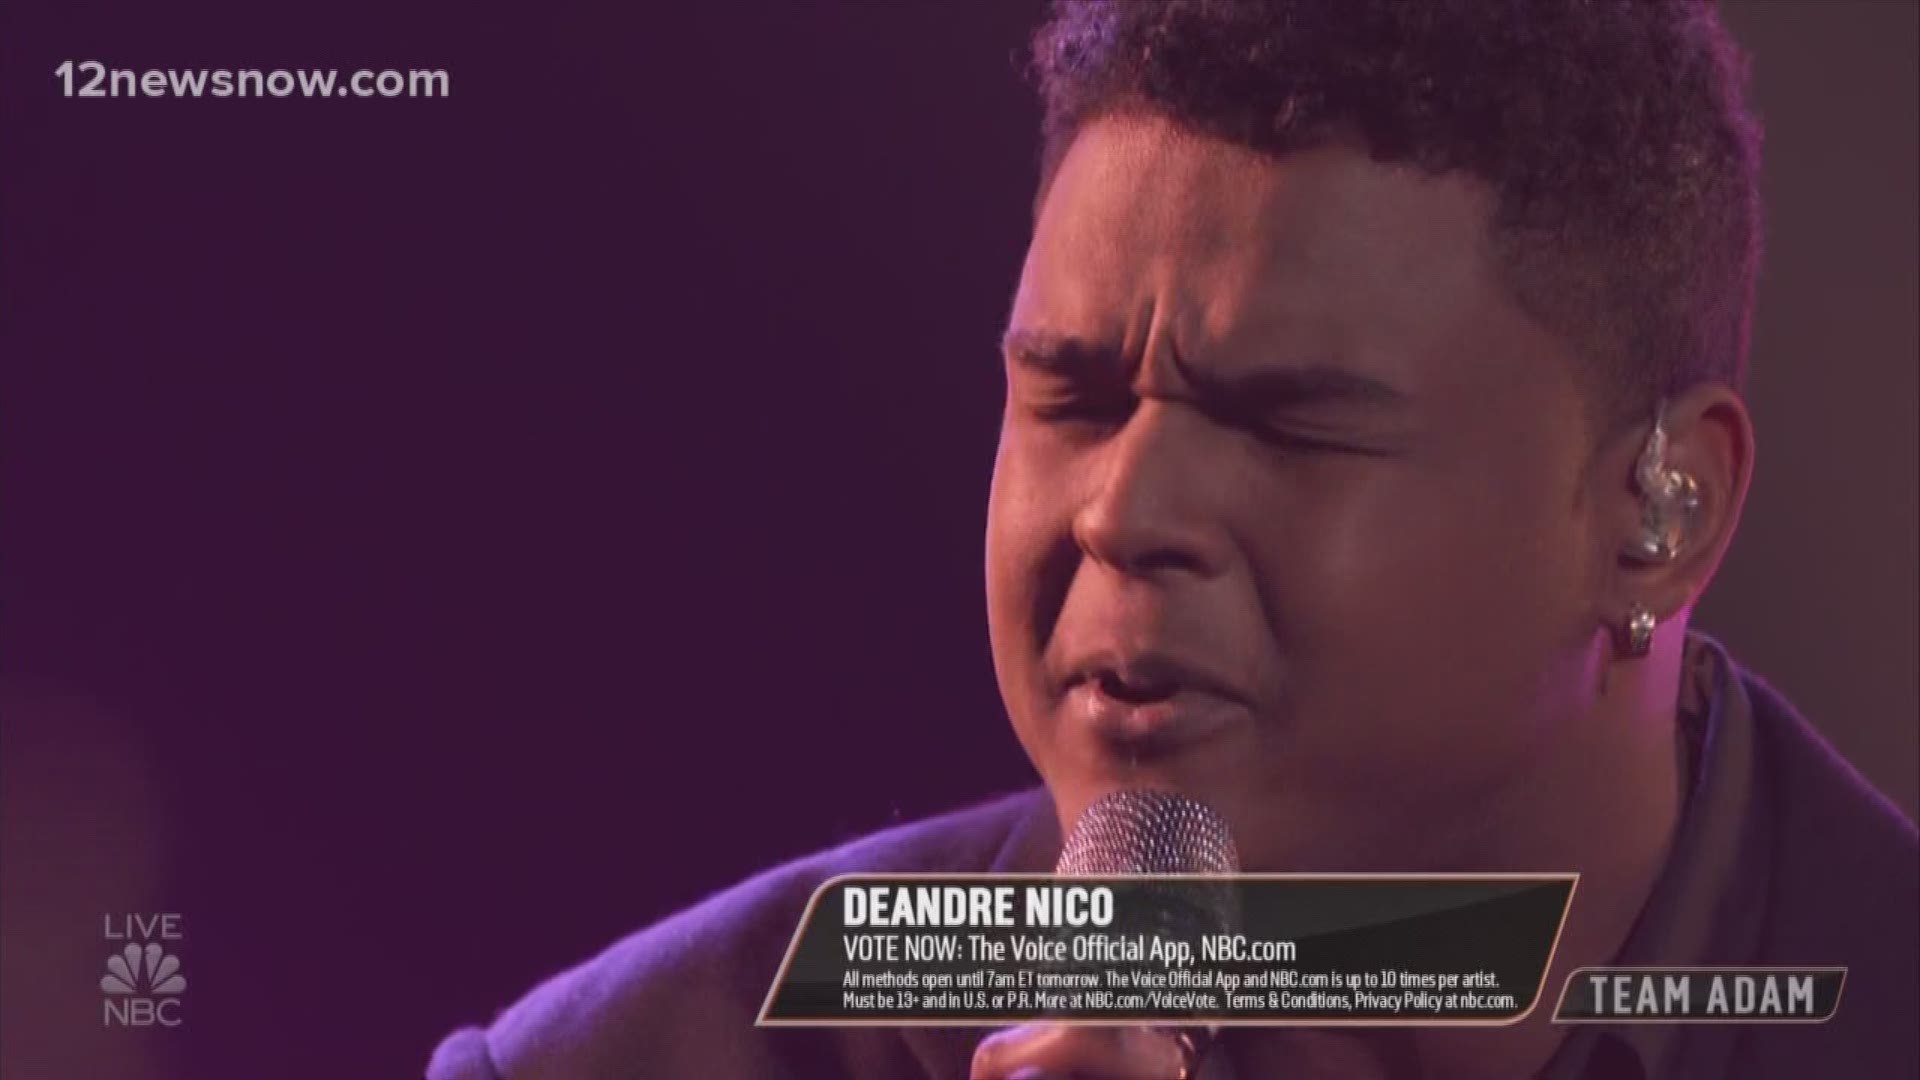 DeAndre Nico sings "Ordinary People" by John Legend on NBC's The Voice Monday night